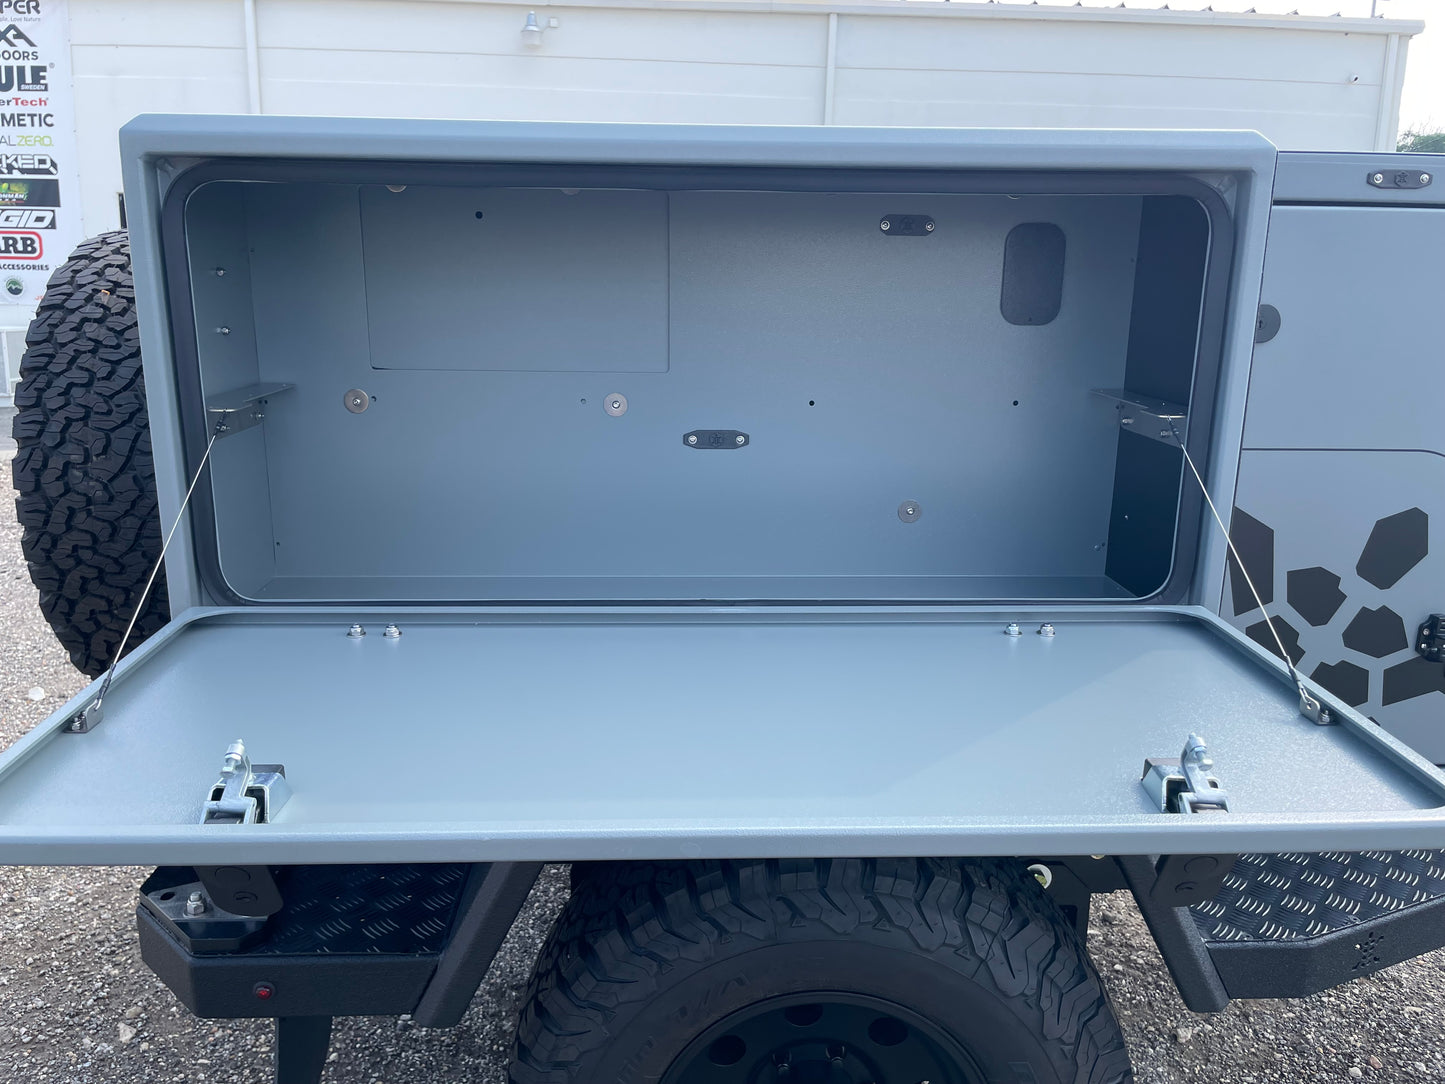 DEAL PENDING!!! Turtleback Expedition Shell Trailer